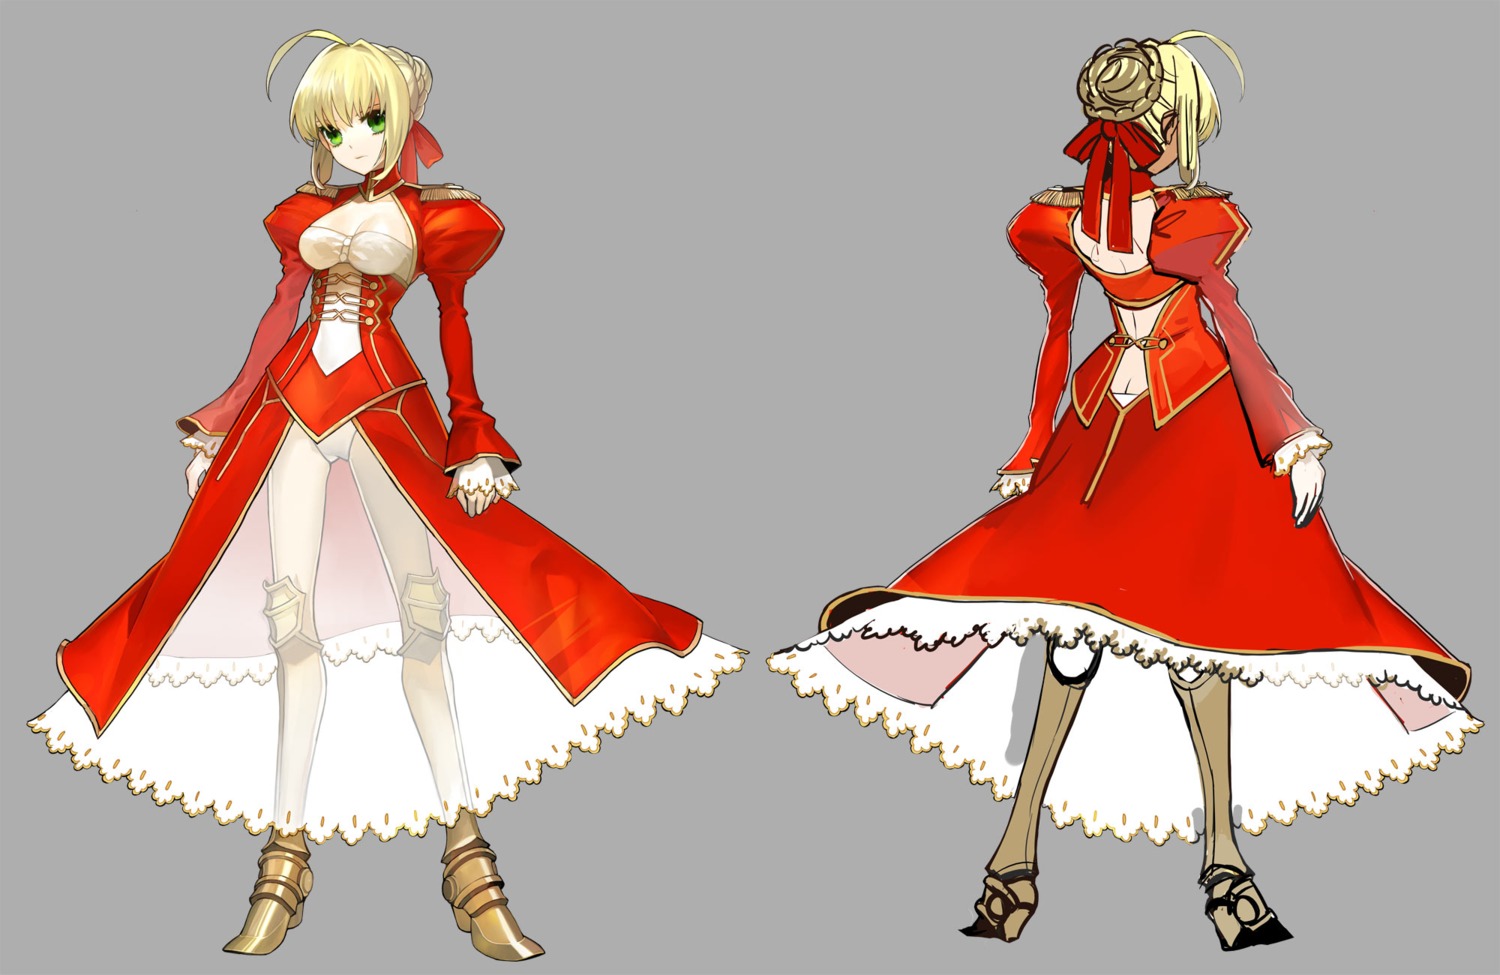 armor ass character_design cleavage dress fate/extra fate/stay_night heels pantsu saber_extra see_through wada_rco